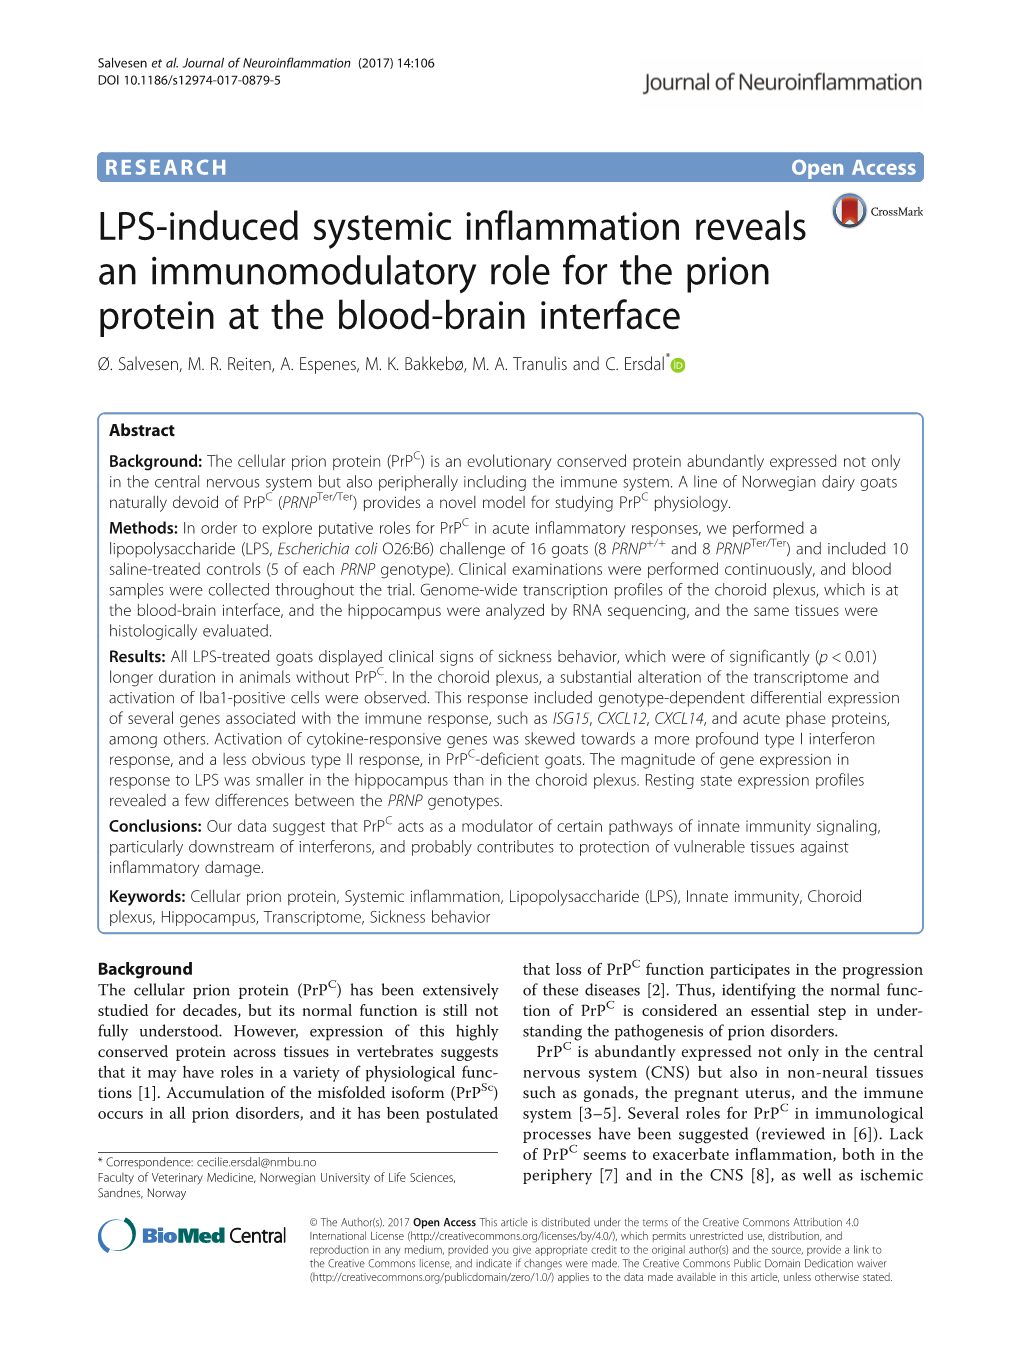 LPS-Induced Systemic Inflammation Reveals an Immunomodulatory Role for ...